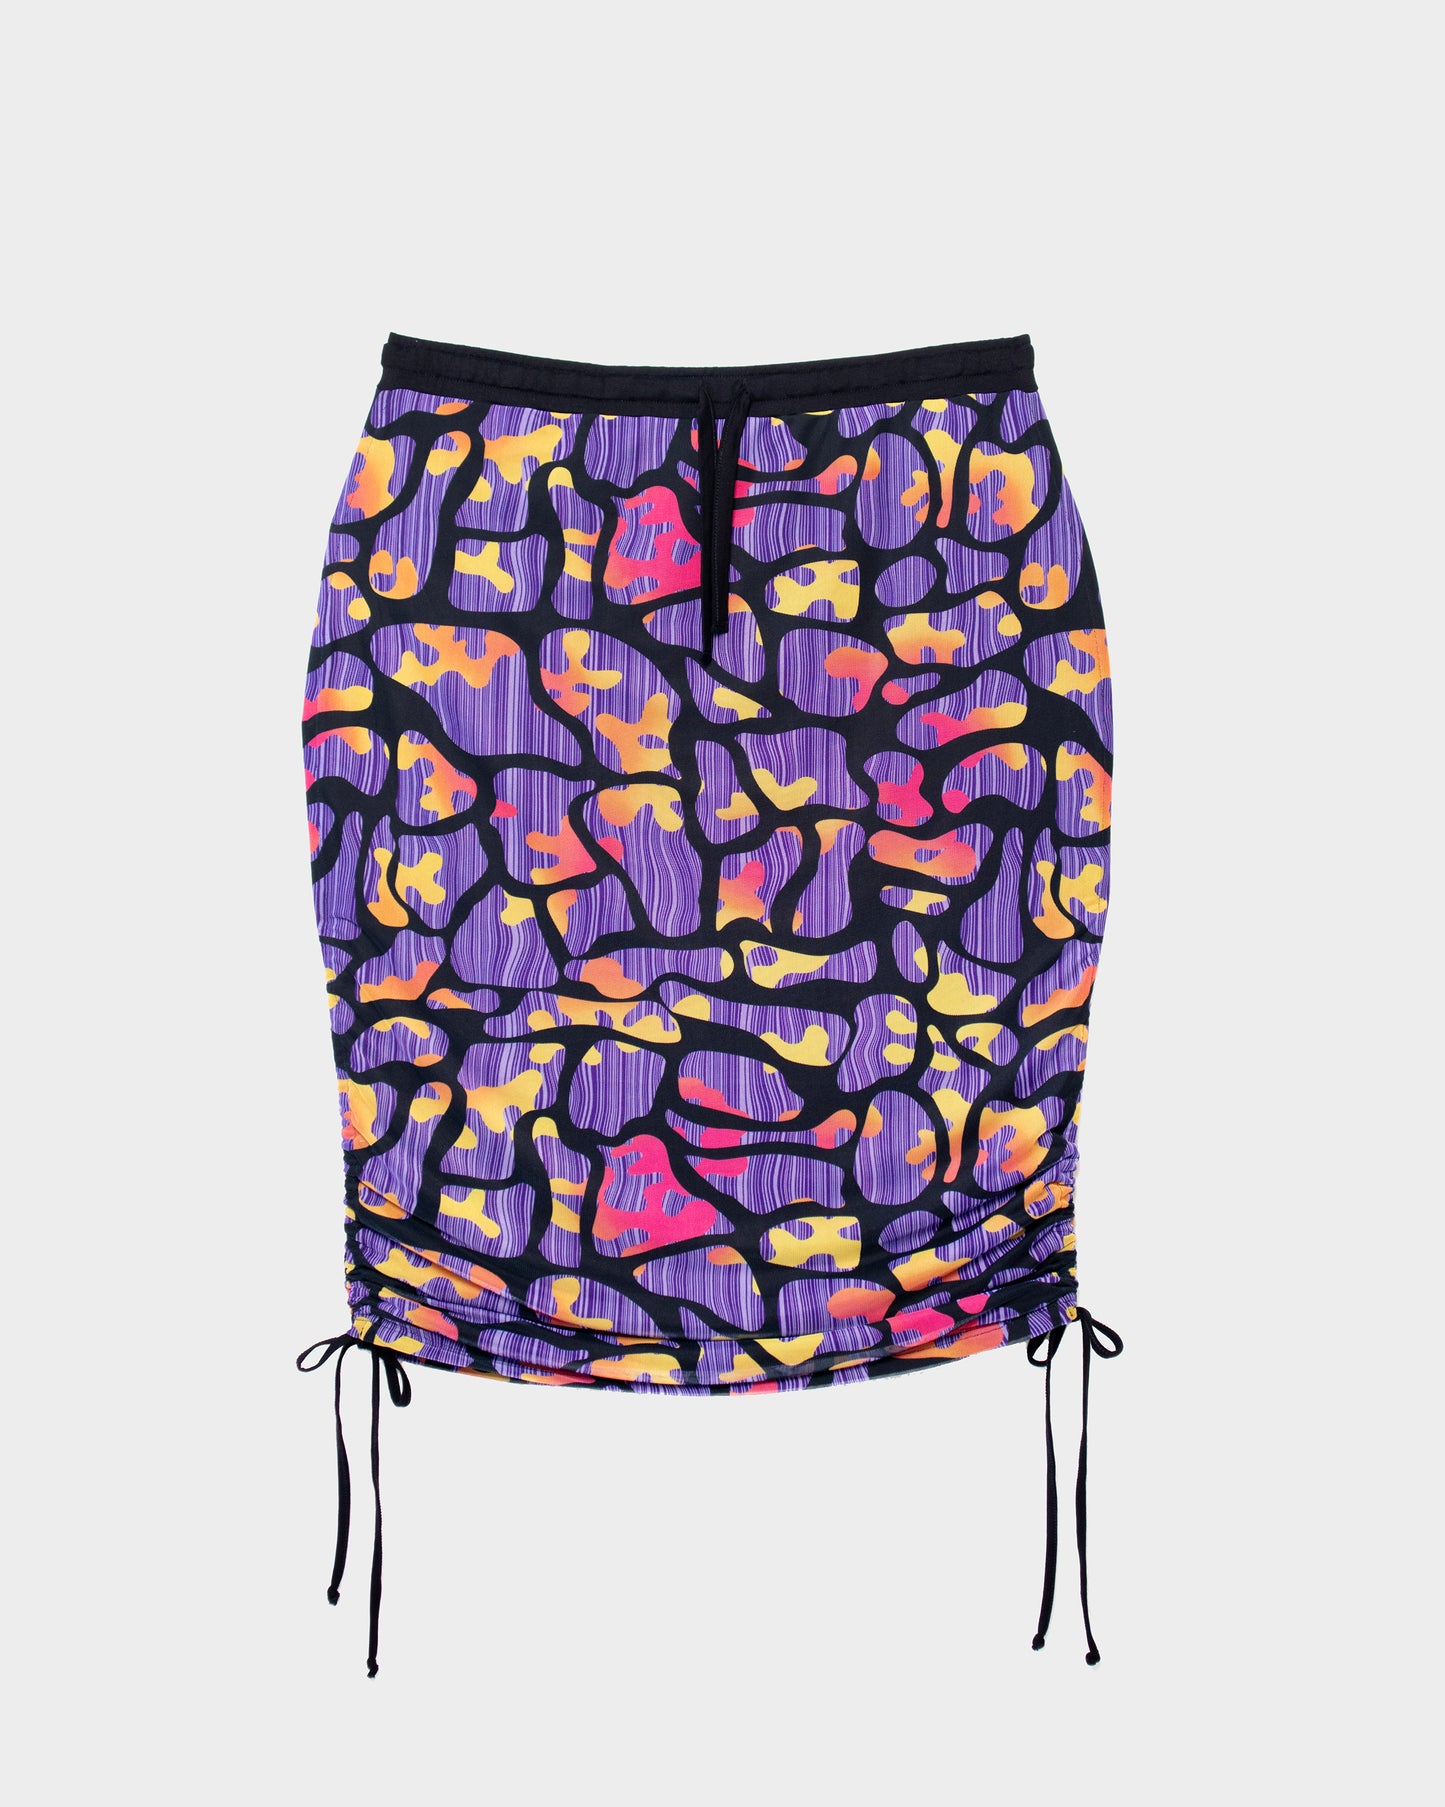 SKIRT / THIGH ME UP / GREAT BARRIER